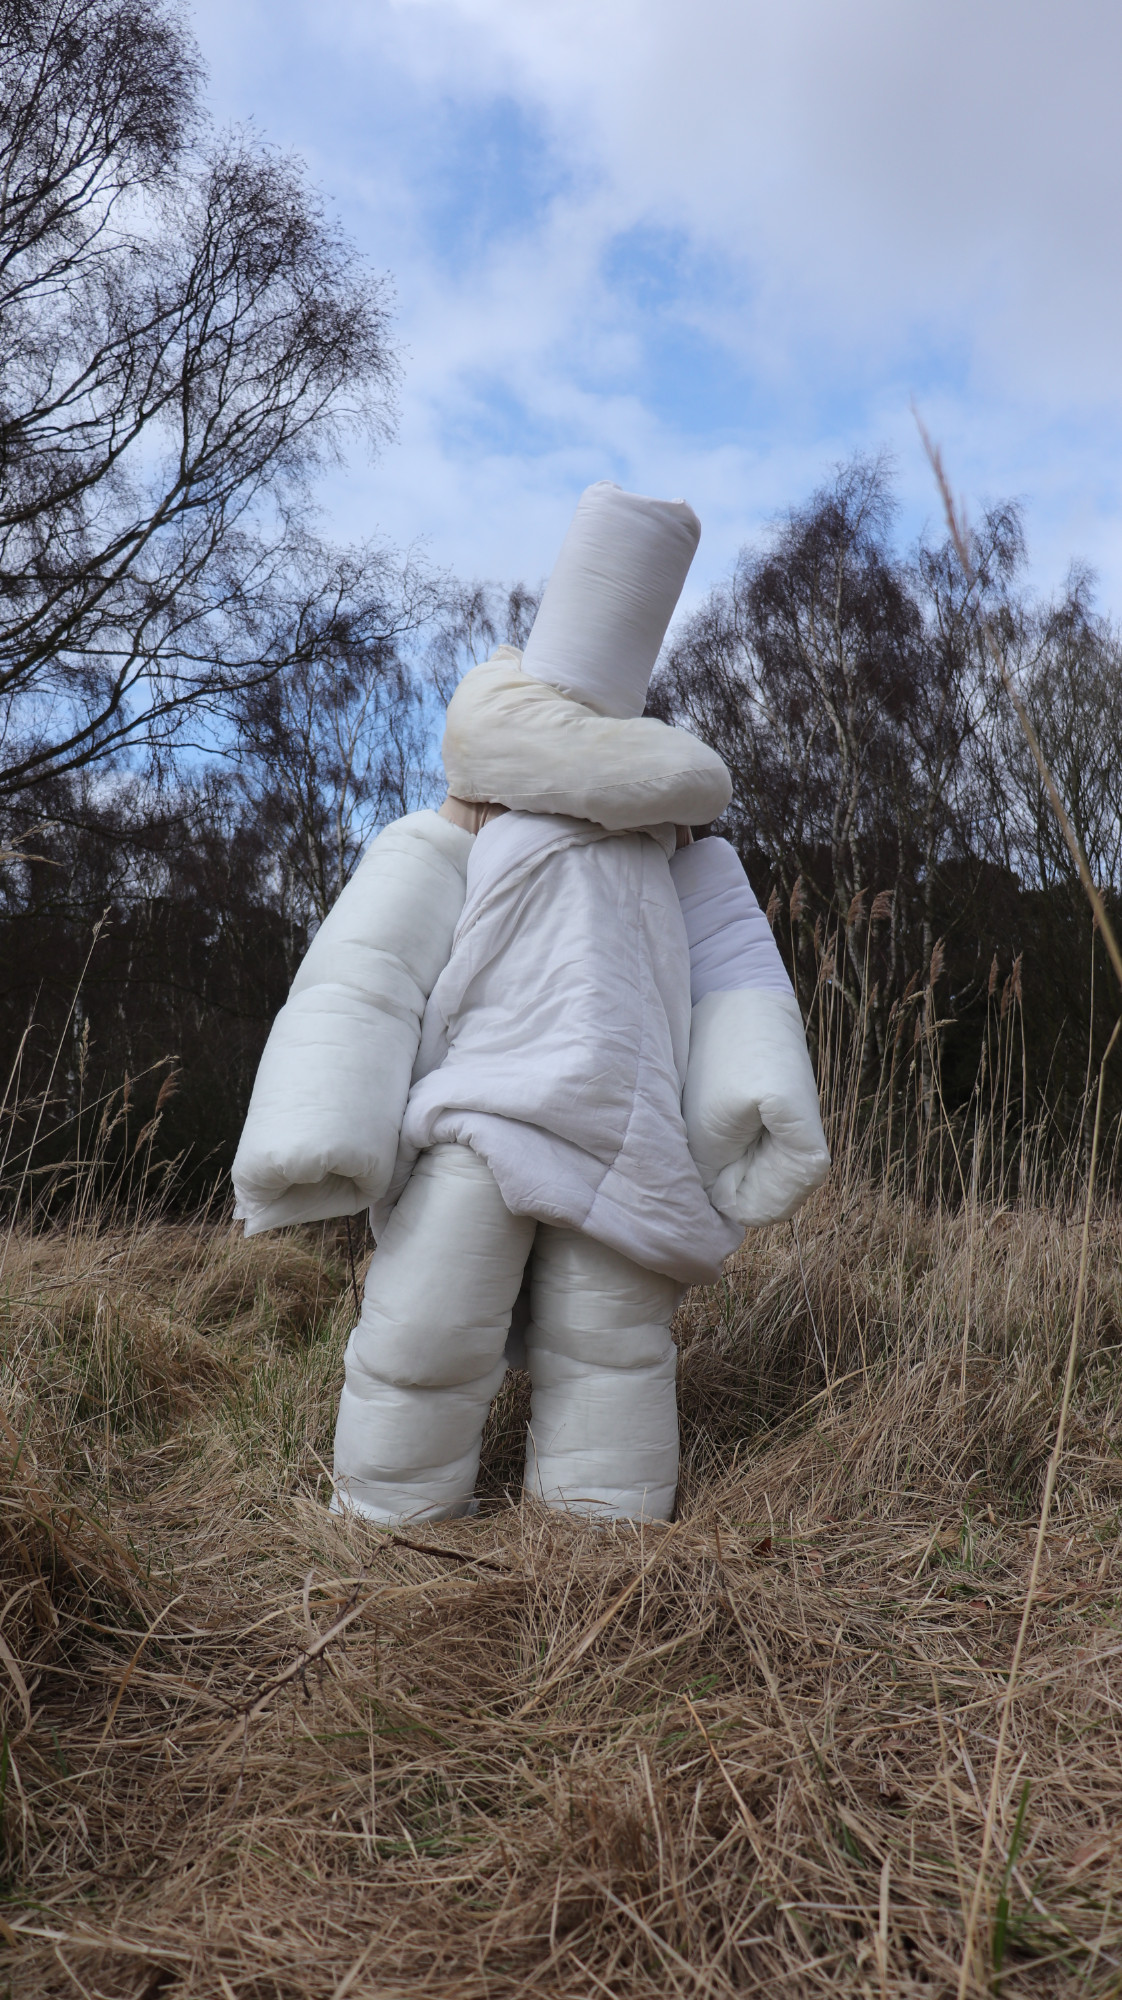 Suit Series, full body suit made from recycled bedding, pillows and duvets, Image taken on Canon 800d